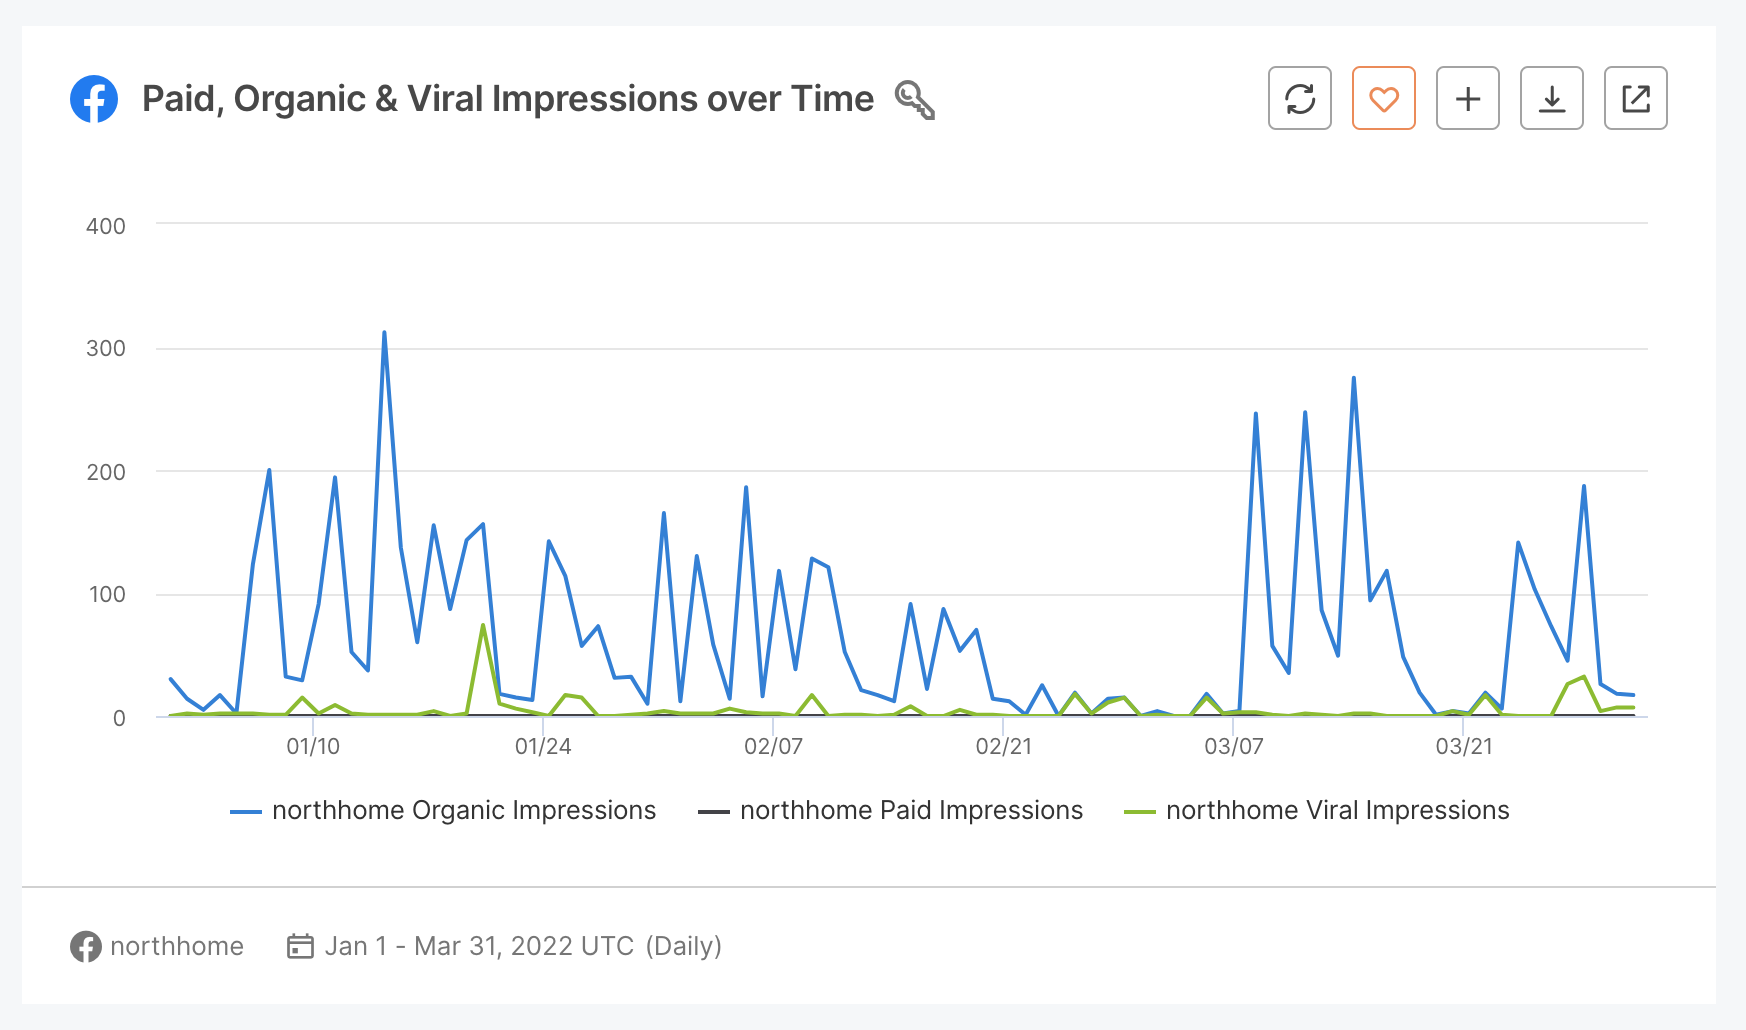 4. Organic, viral, paid impressions over time